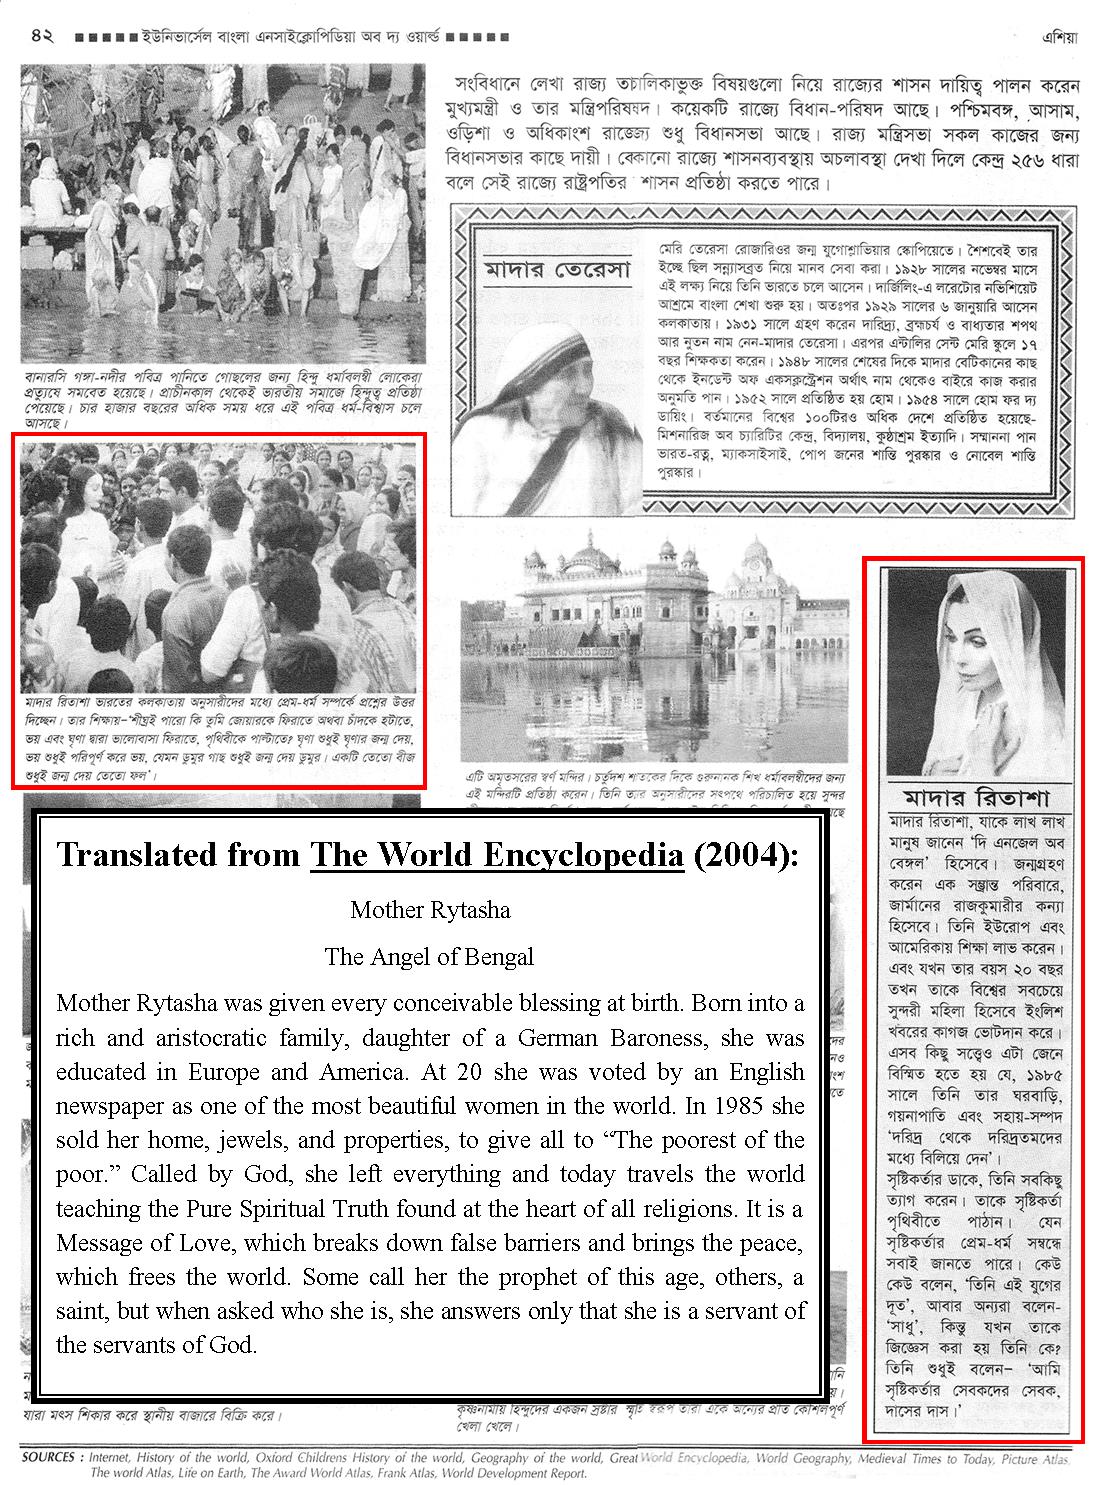 Mother Rytasha's biography in the Universal Encyclopedia of the World